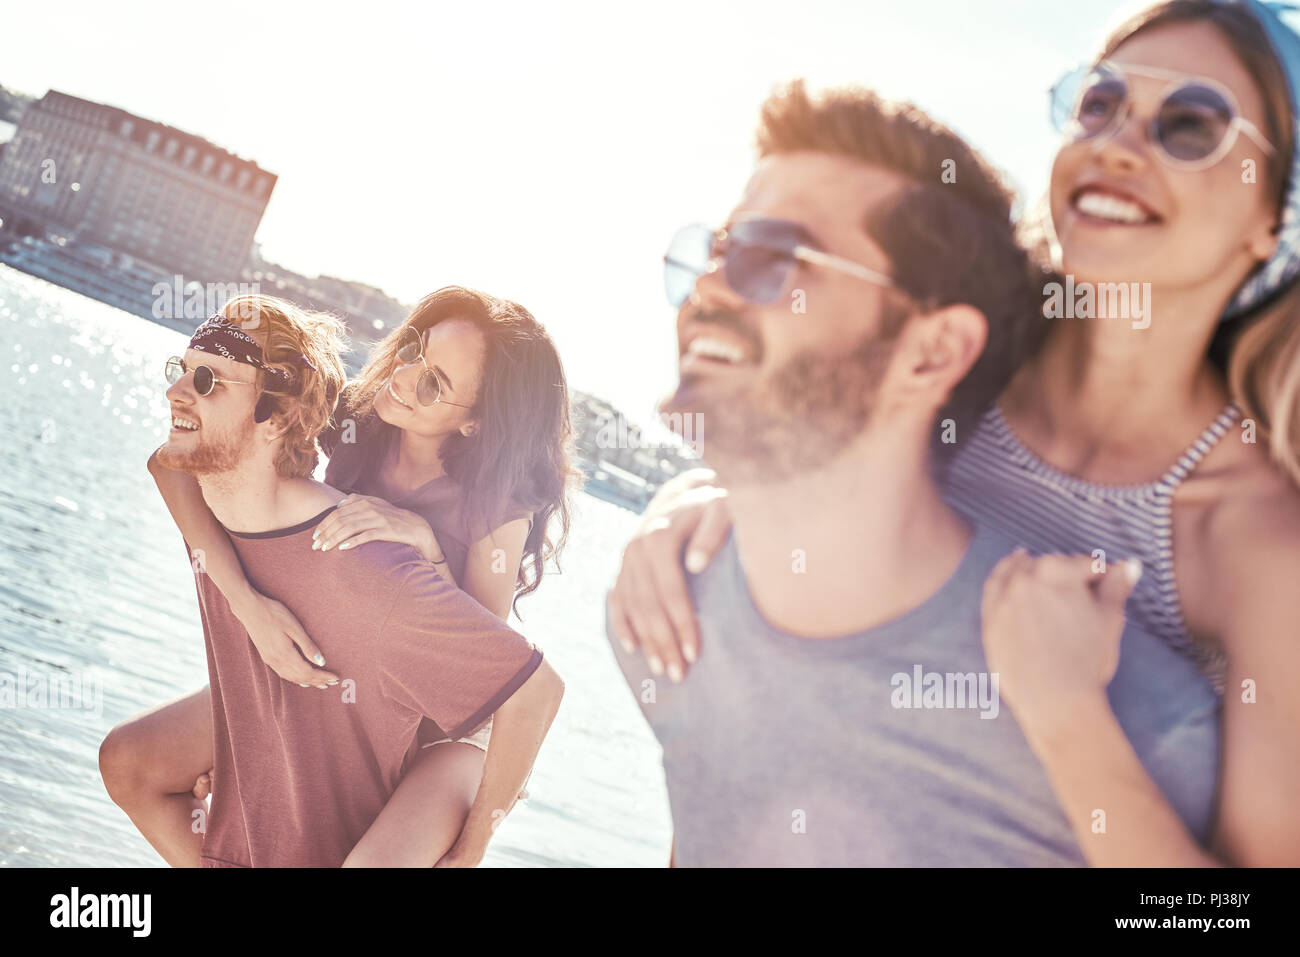 Outdoors photo of happy boyfriends piggybacking their girlfriends at sunset on beach Stock Photo